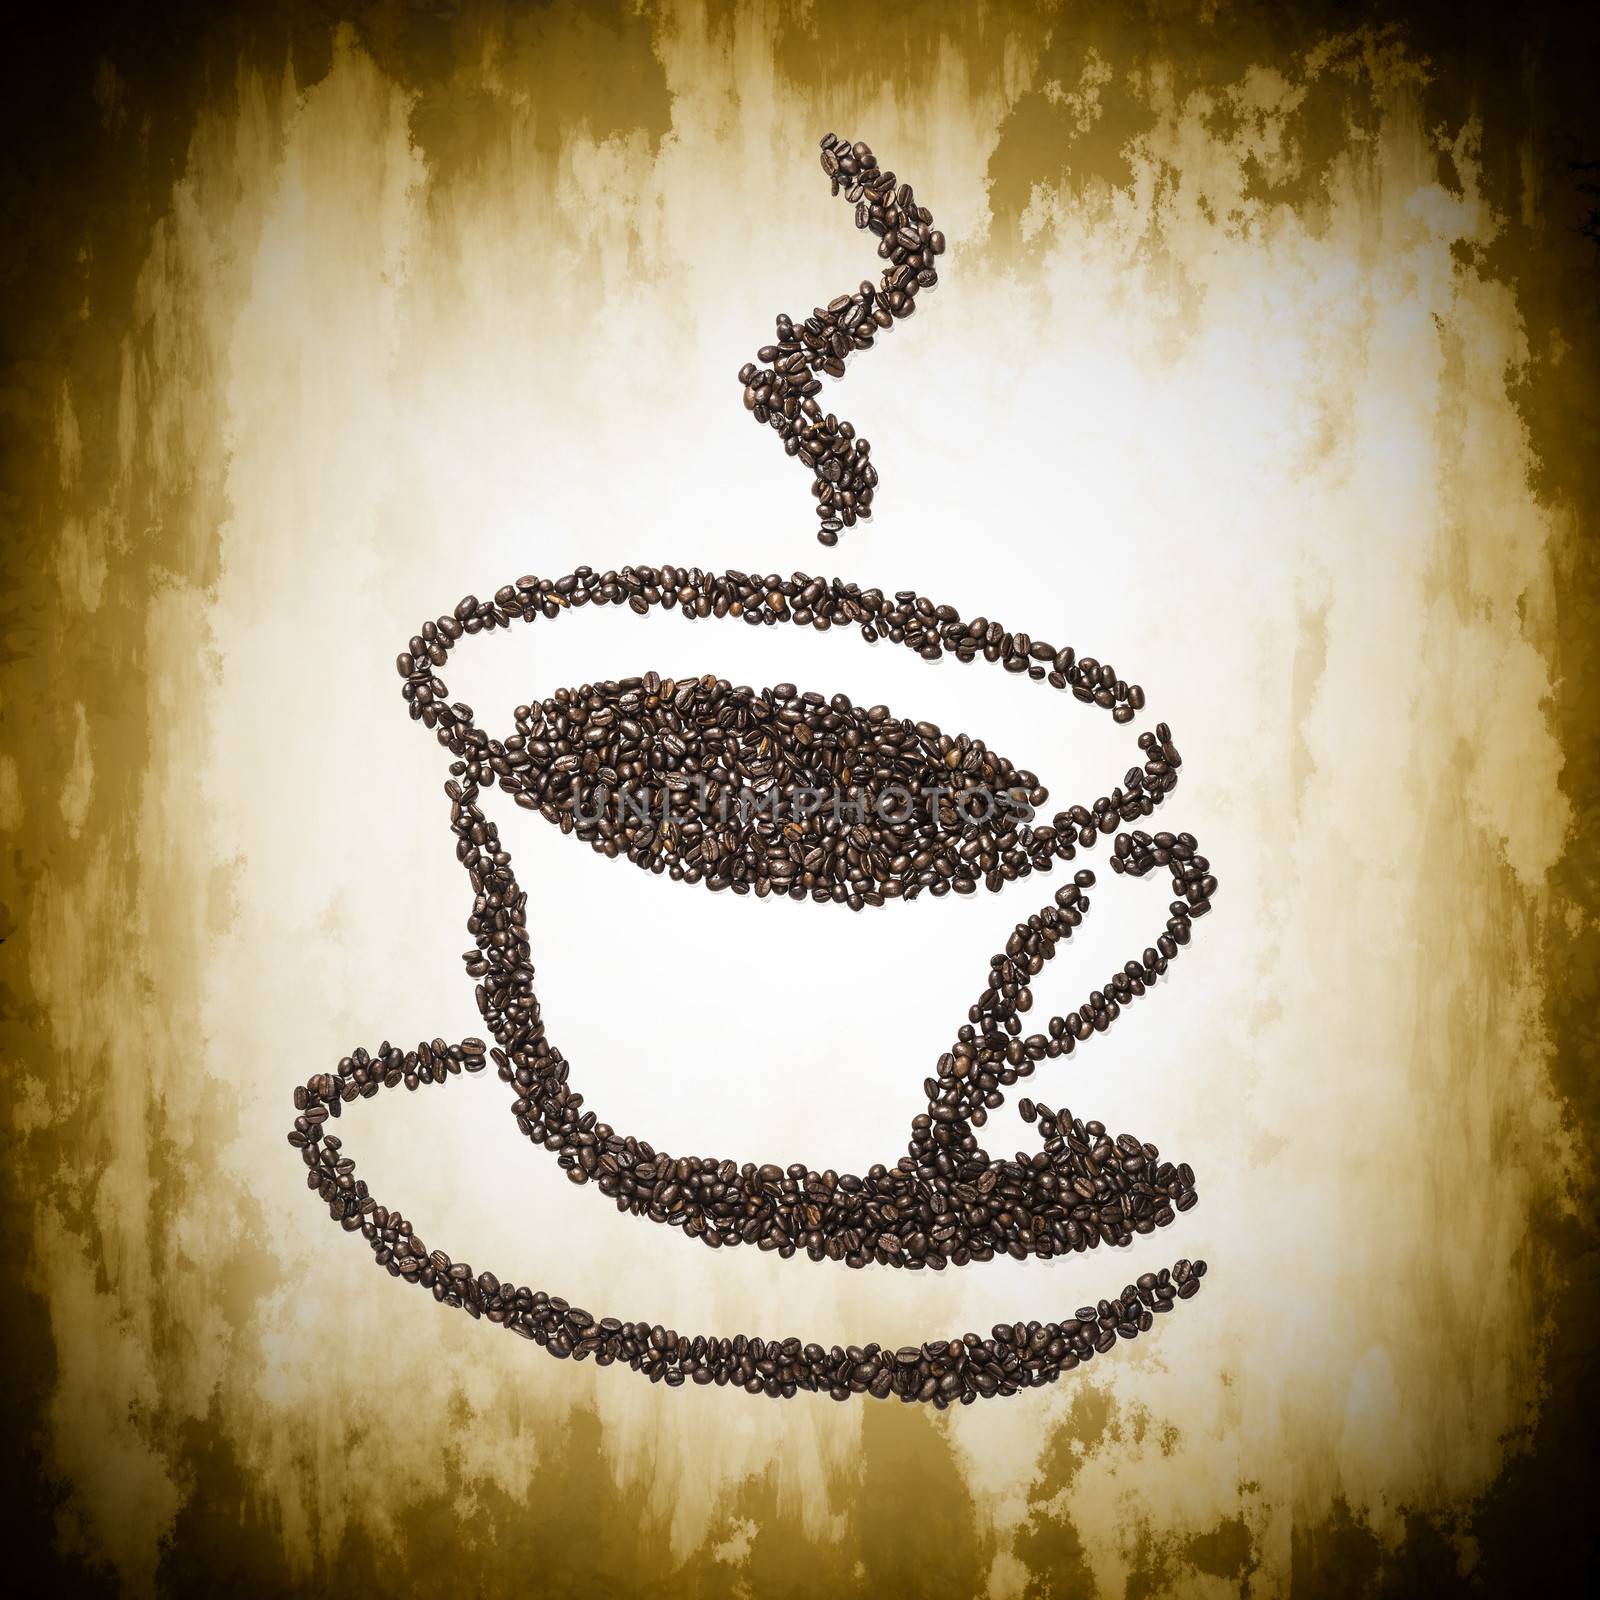 Image of a coffee cup made from coffee beans